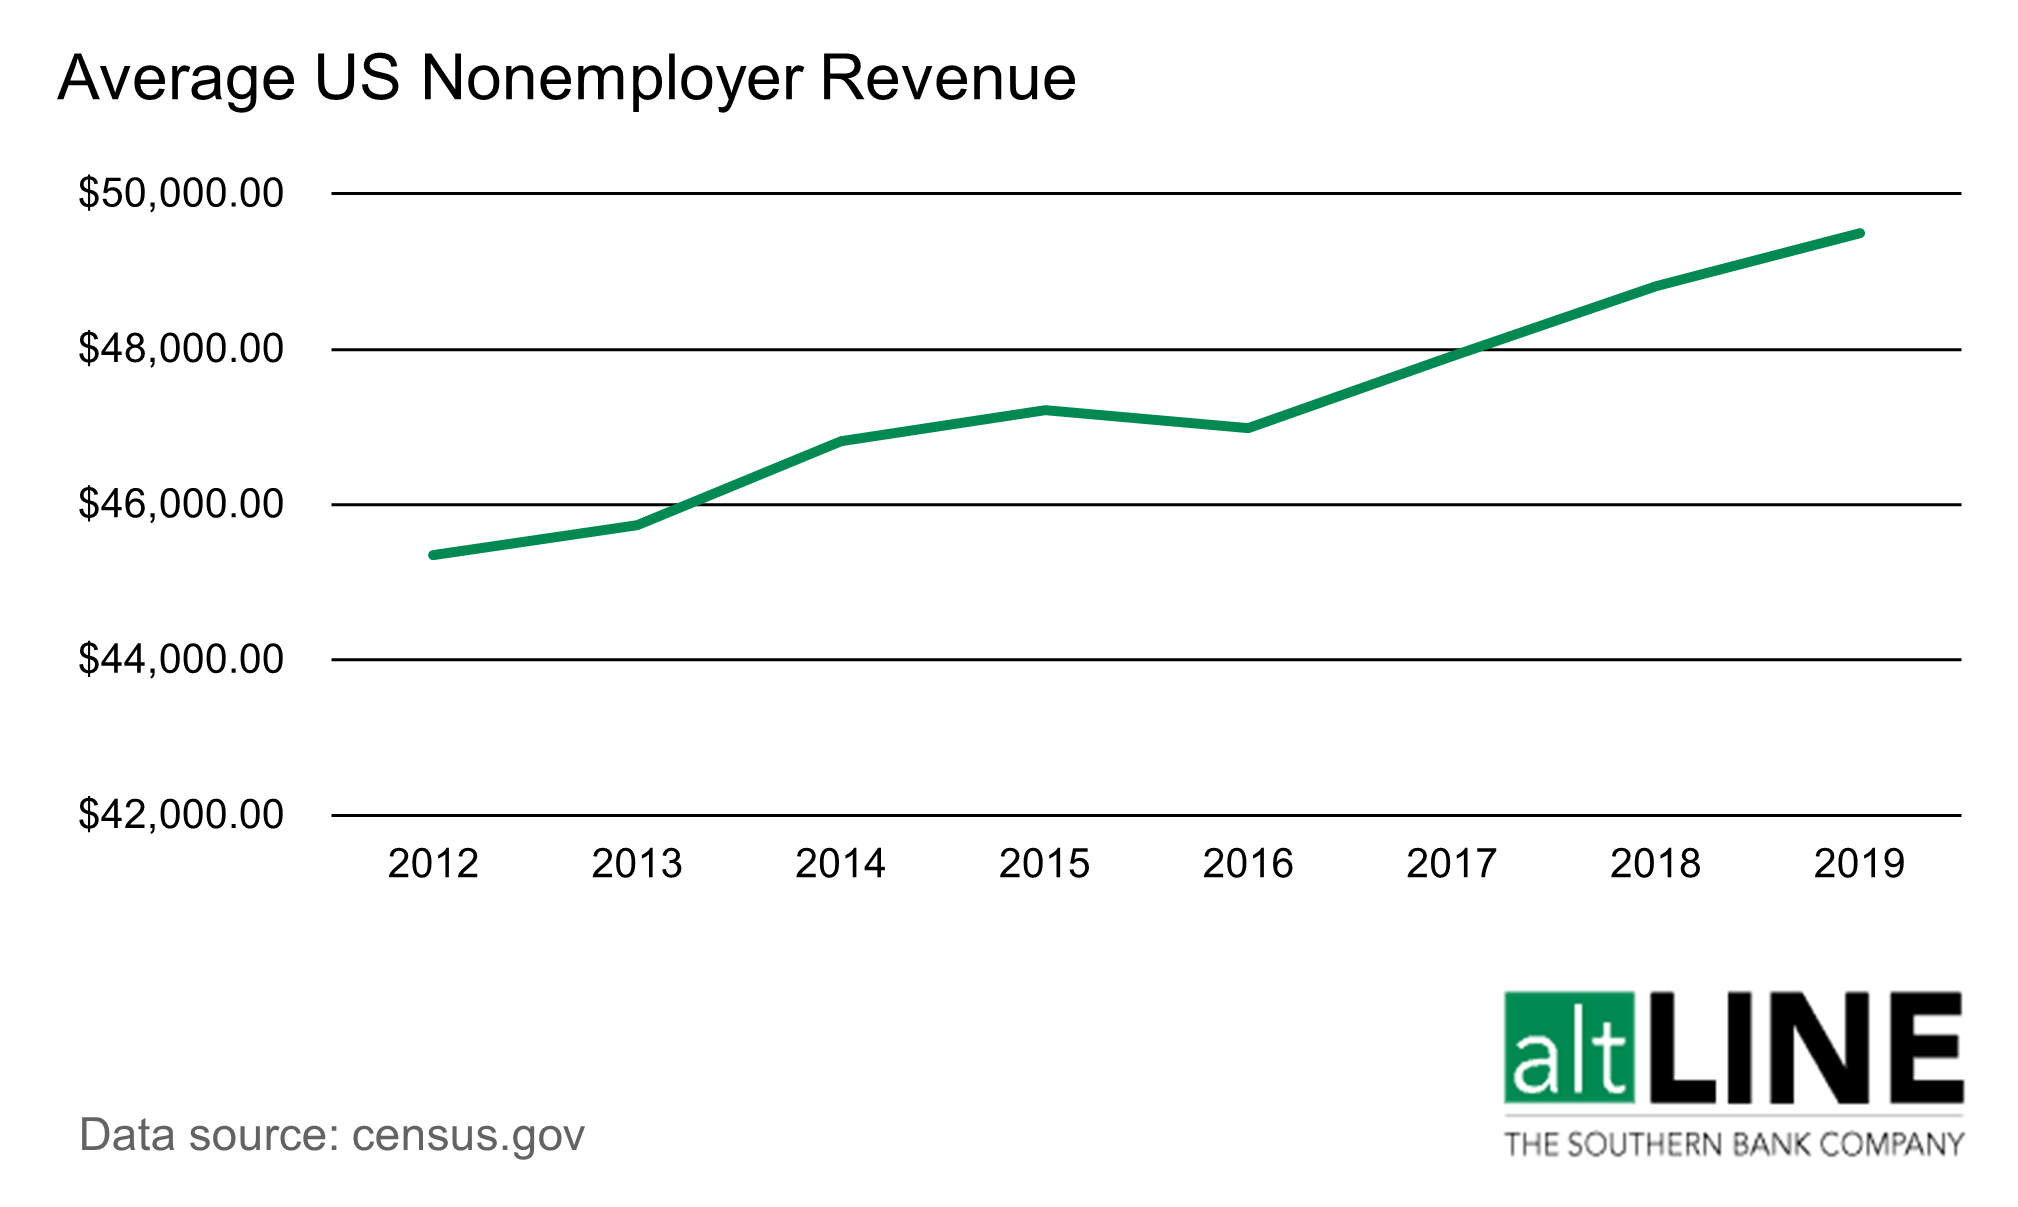 chart showing the average US nonemployer revenue over time